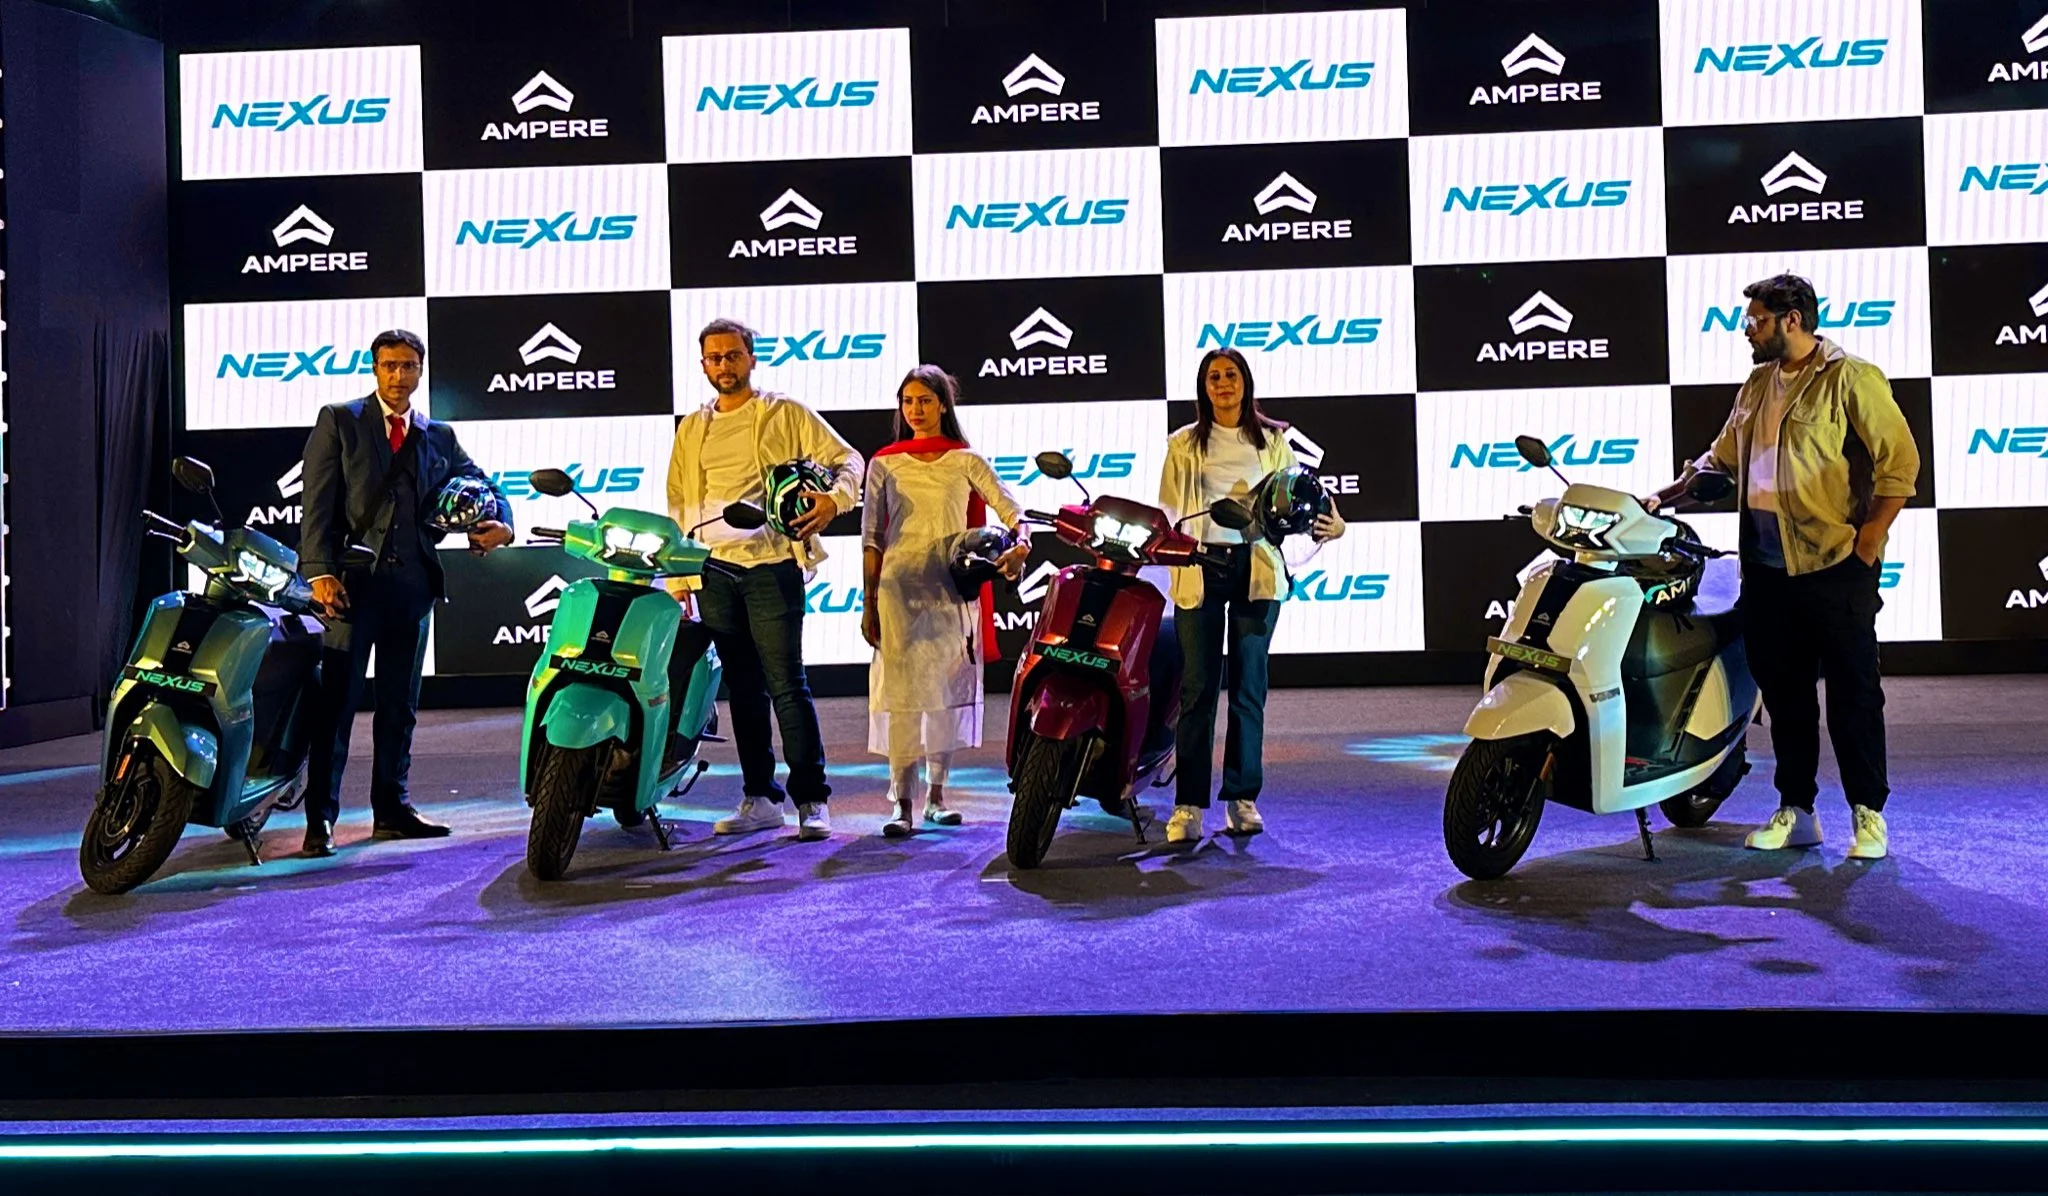 Ampere Nexus Electric Scooter